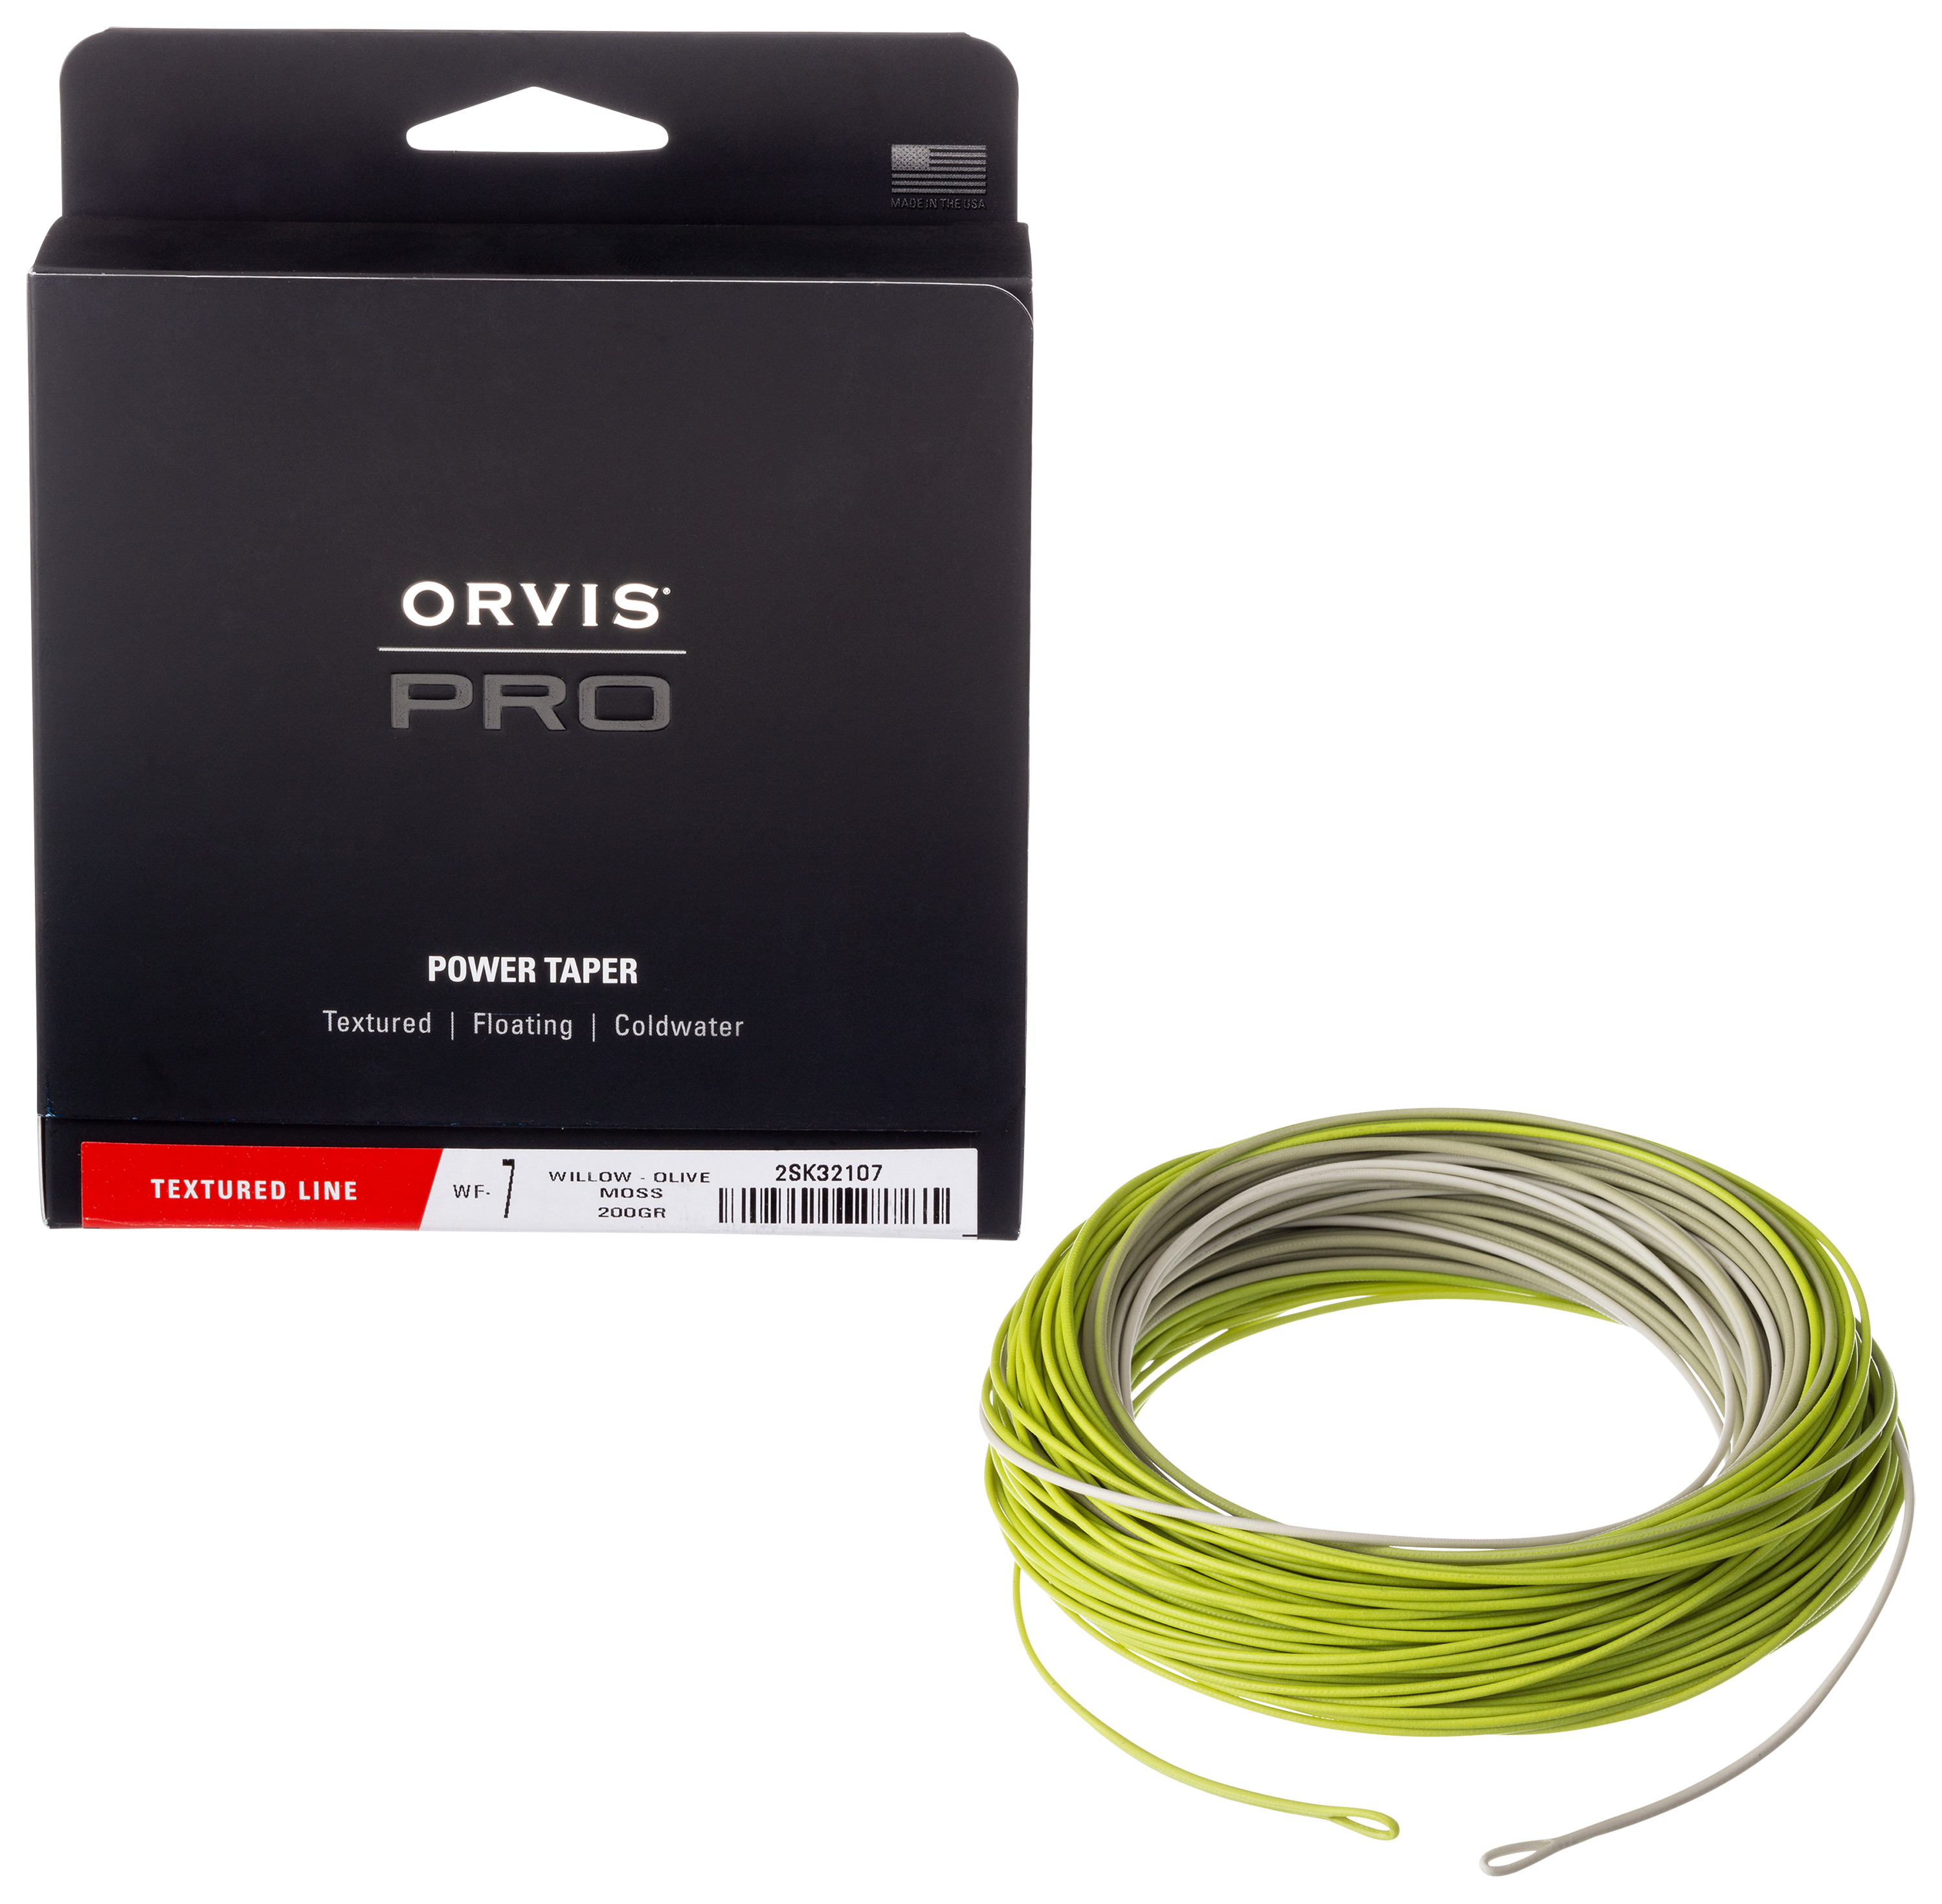 Orvis Pro Power Taper Textured Fly Line - Line Weight 4